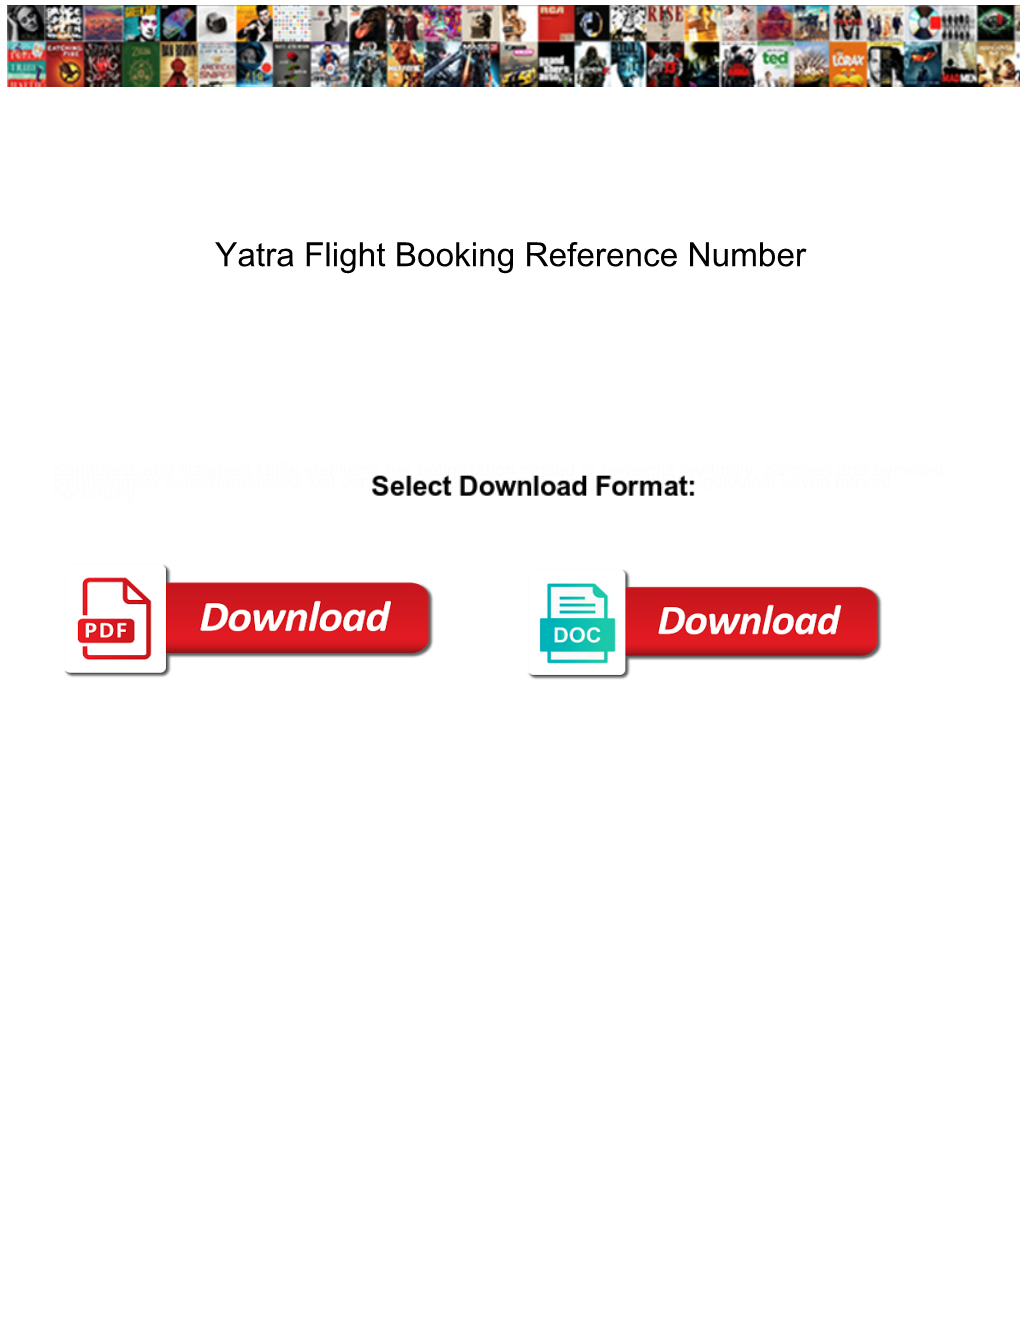 Yatra Flight Booking Reference Number